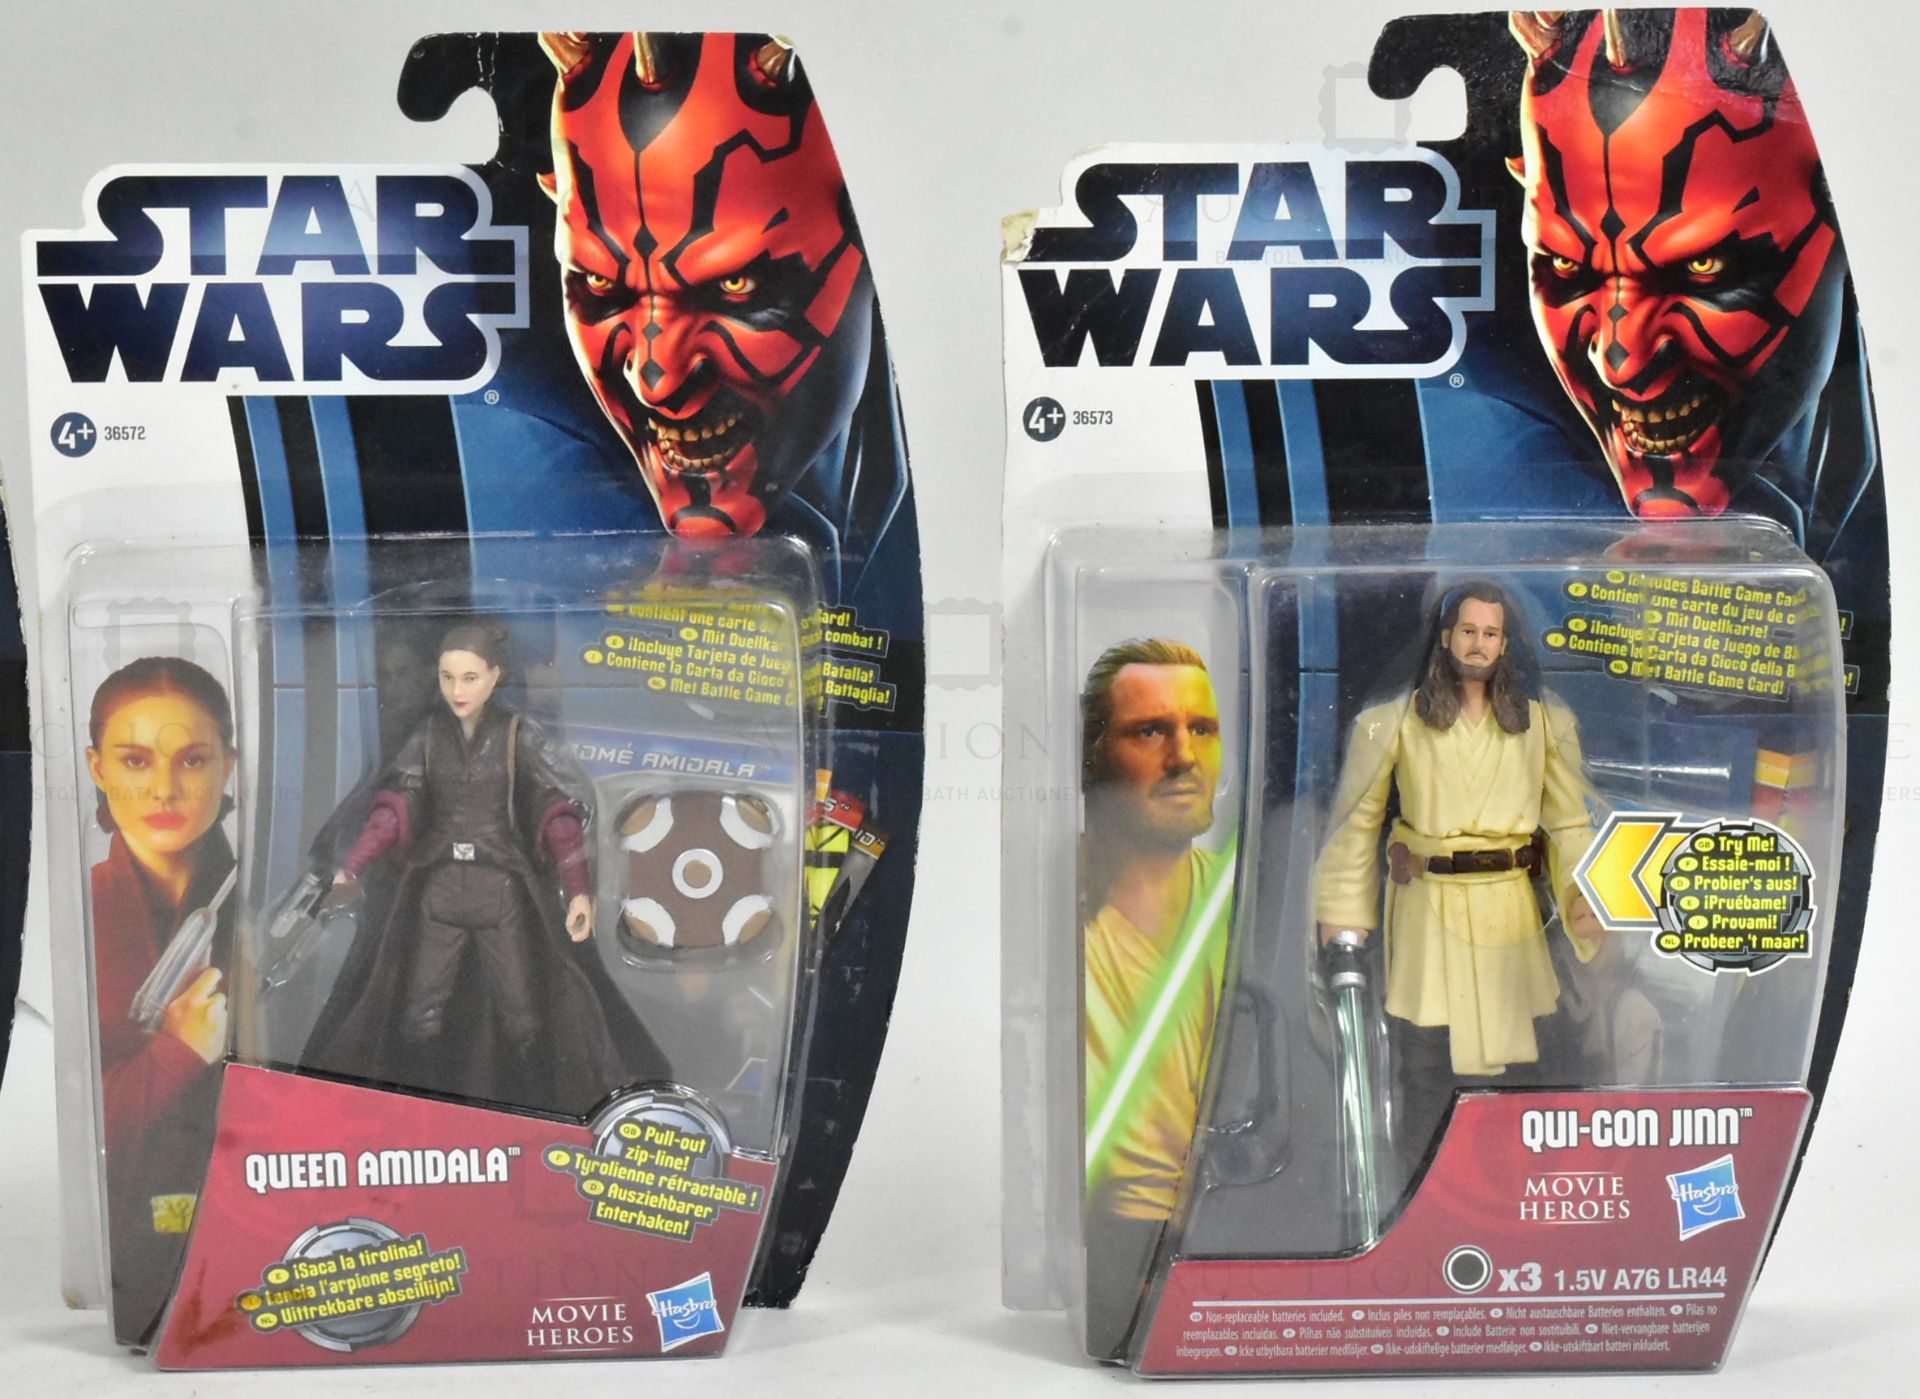 STAR WARS - 2012 HASBRO MOVIE HEROES CARDED ACTION FIGURES - Image 6 of 6